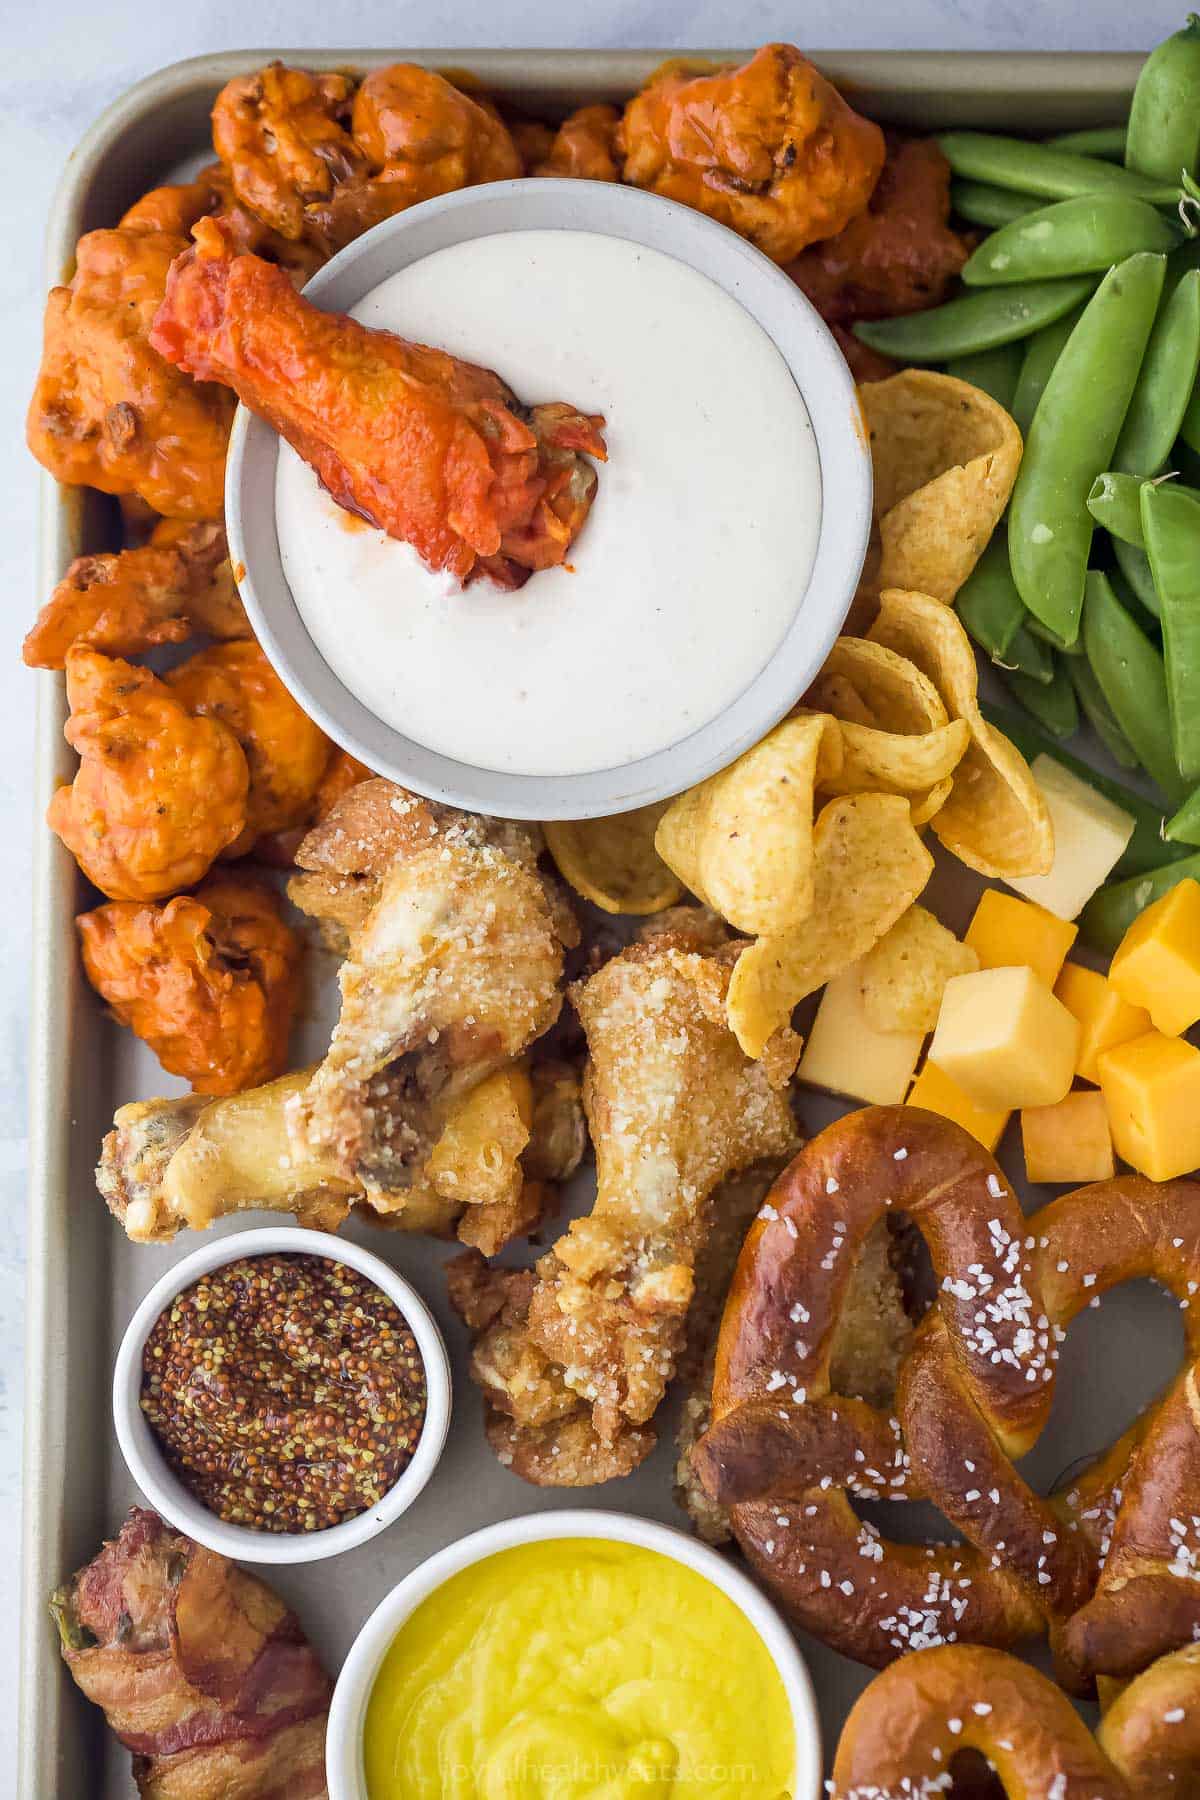 an assortment of snack foods like chicken wings, pretzels, cheese cubes, vegetables, with a bowl of ranch dressing and a small bowl of whole grain mustard